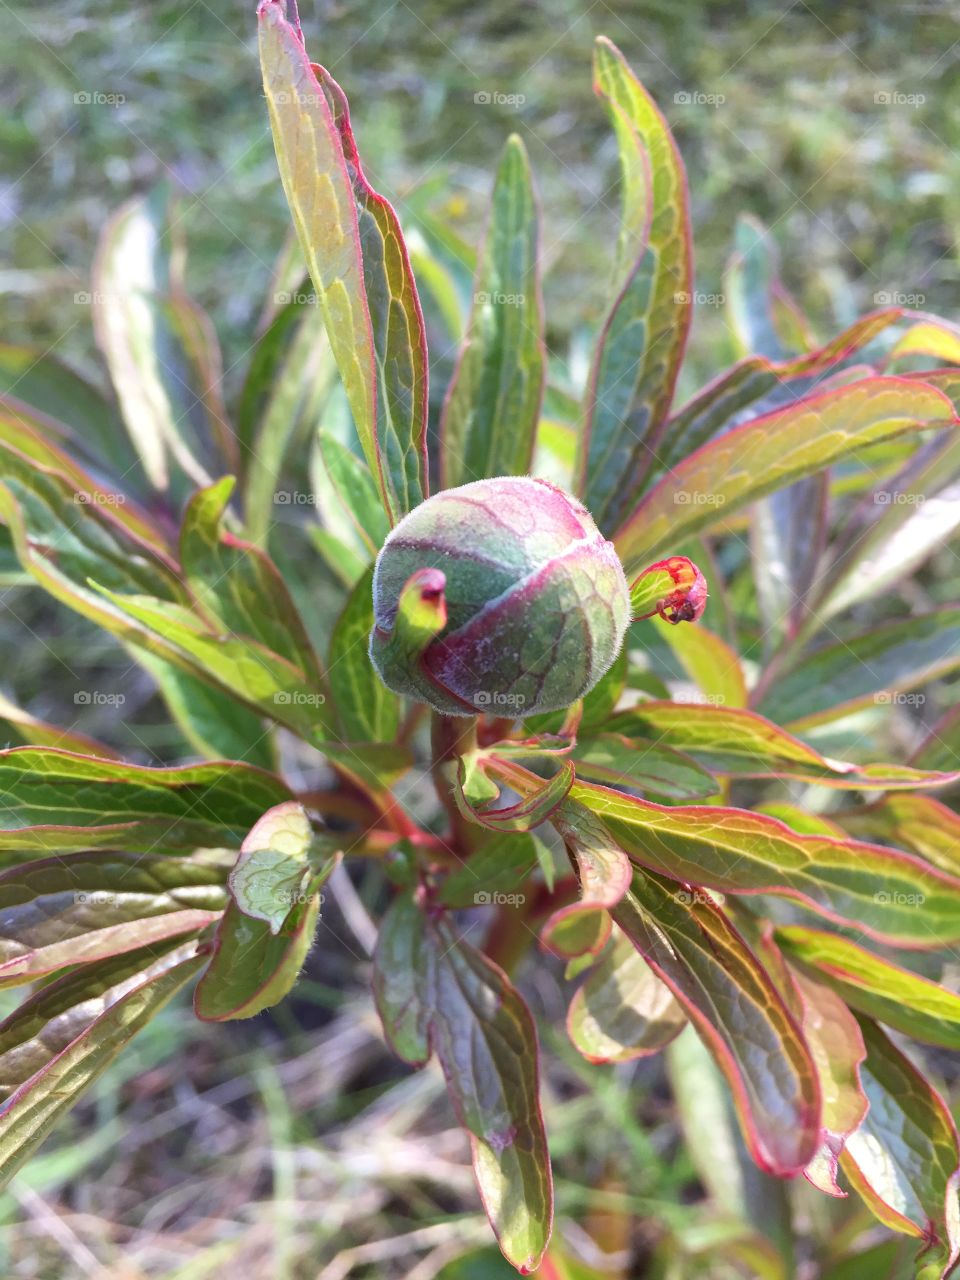 Peony at my garden will soon be blooming 